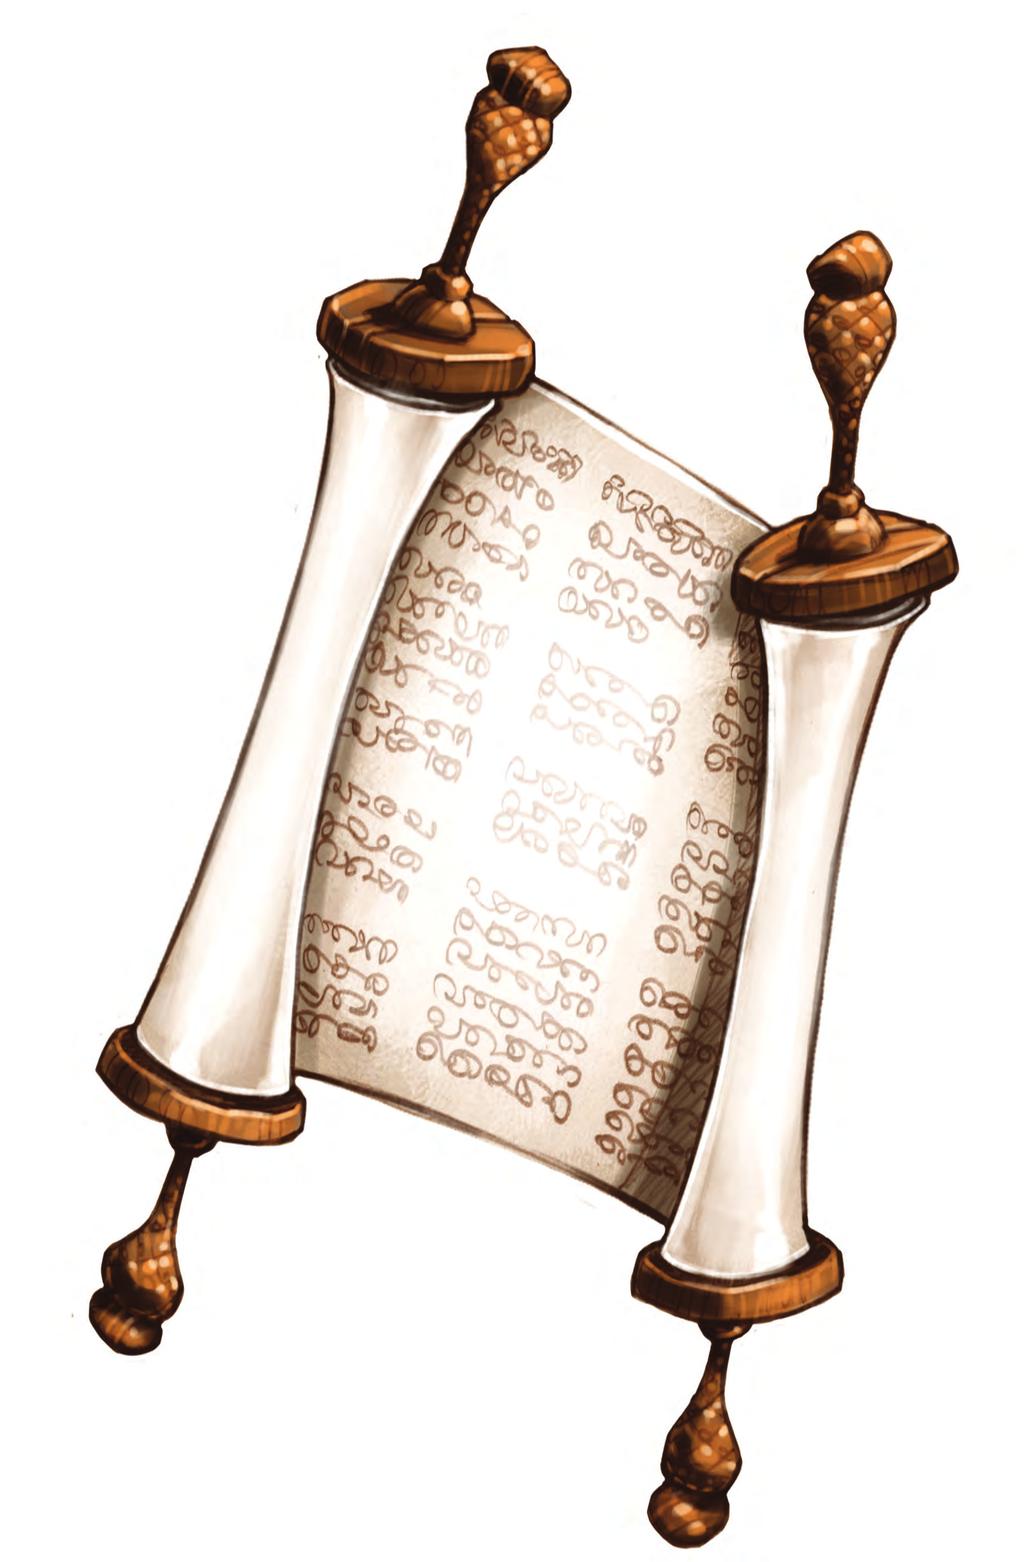 Hammer Scroll Josiah Story Cards (The